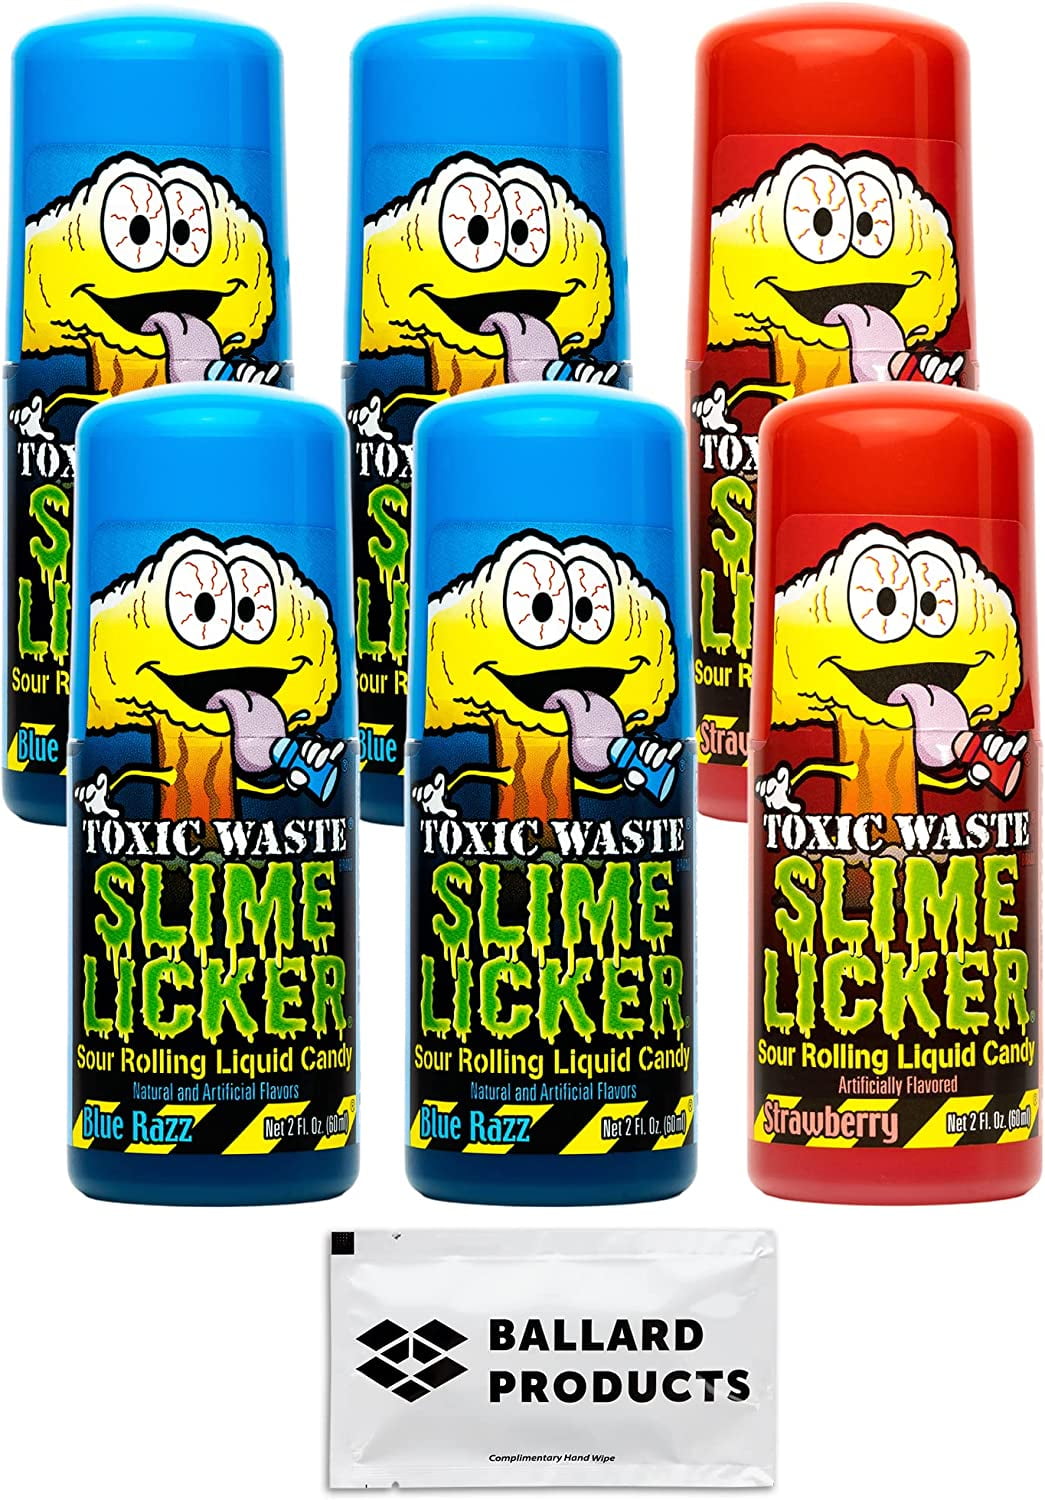 Toxic Waste Slime Licker Sour Rolling Liquid Candy, Assorted - Shop Candy  at H-E-B